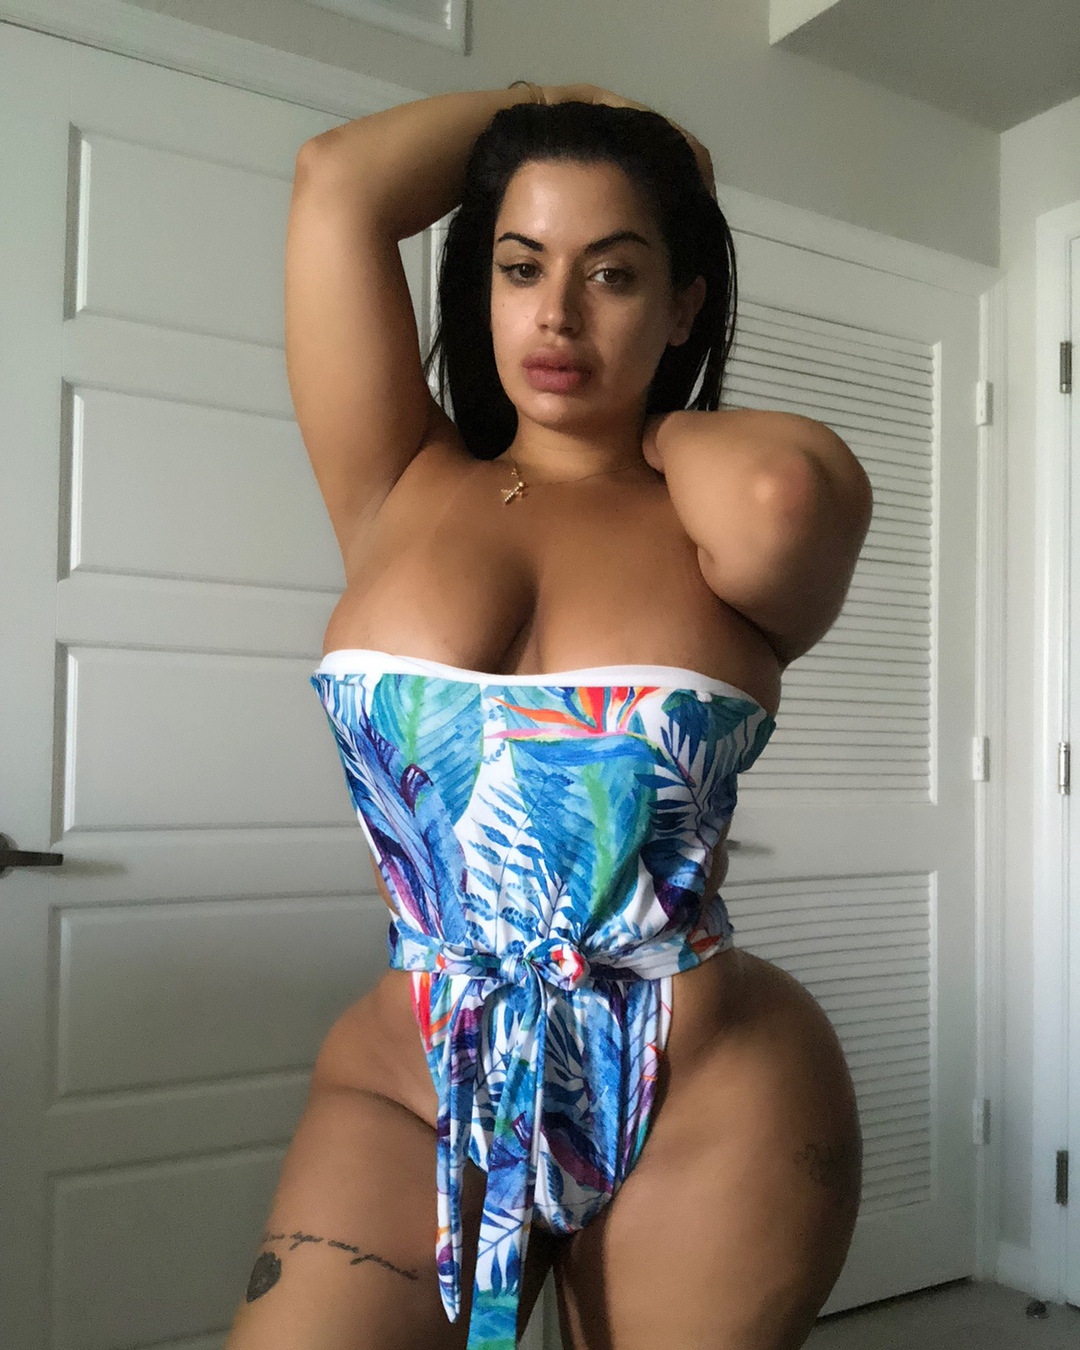 Lissa aires hd